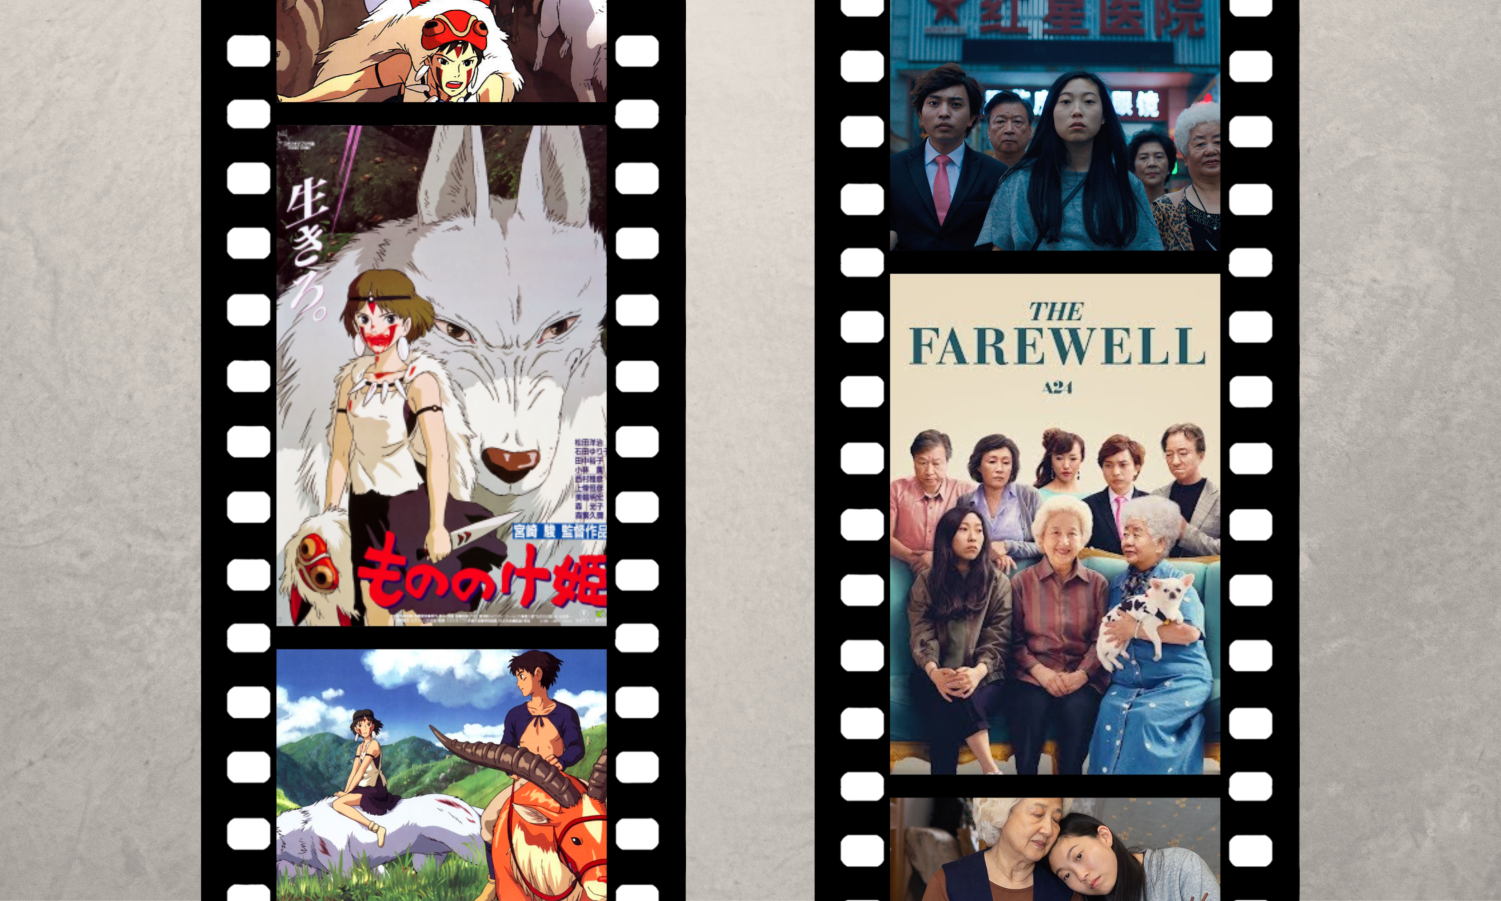 Two+film+strips+with+posters+from+%E2%80%9CPrincess+Mononoke%E2%80%9D+and+%E2%80%9CThe+Farewell%E2%80%9D+are+side-by-side.